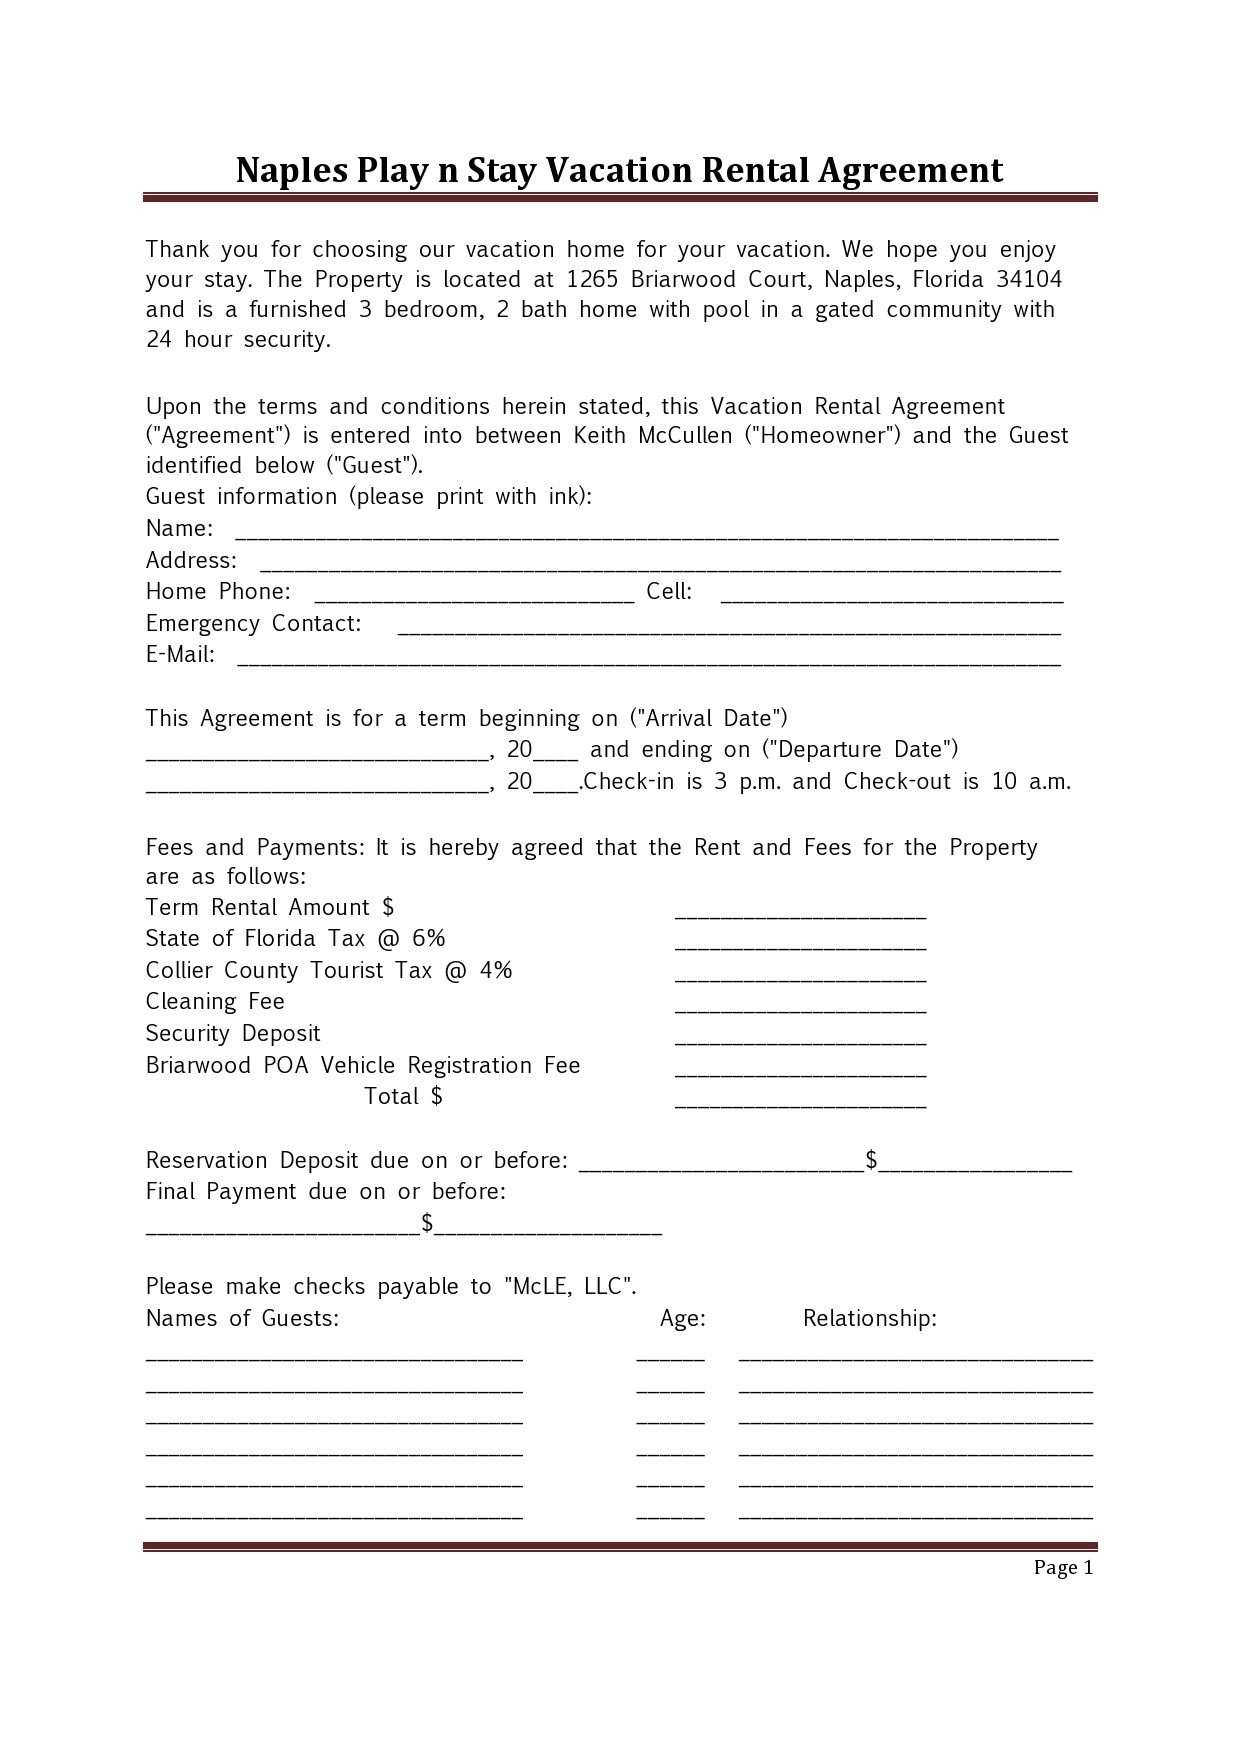 Free vacation rental agreement 22